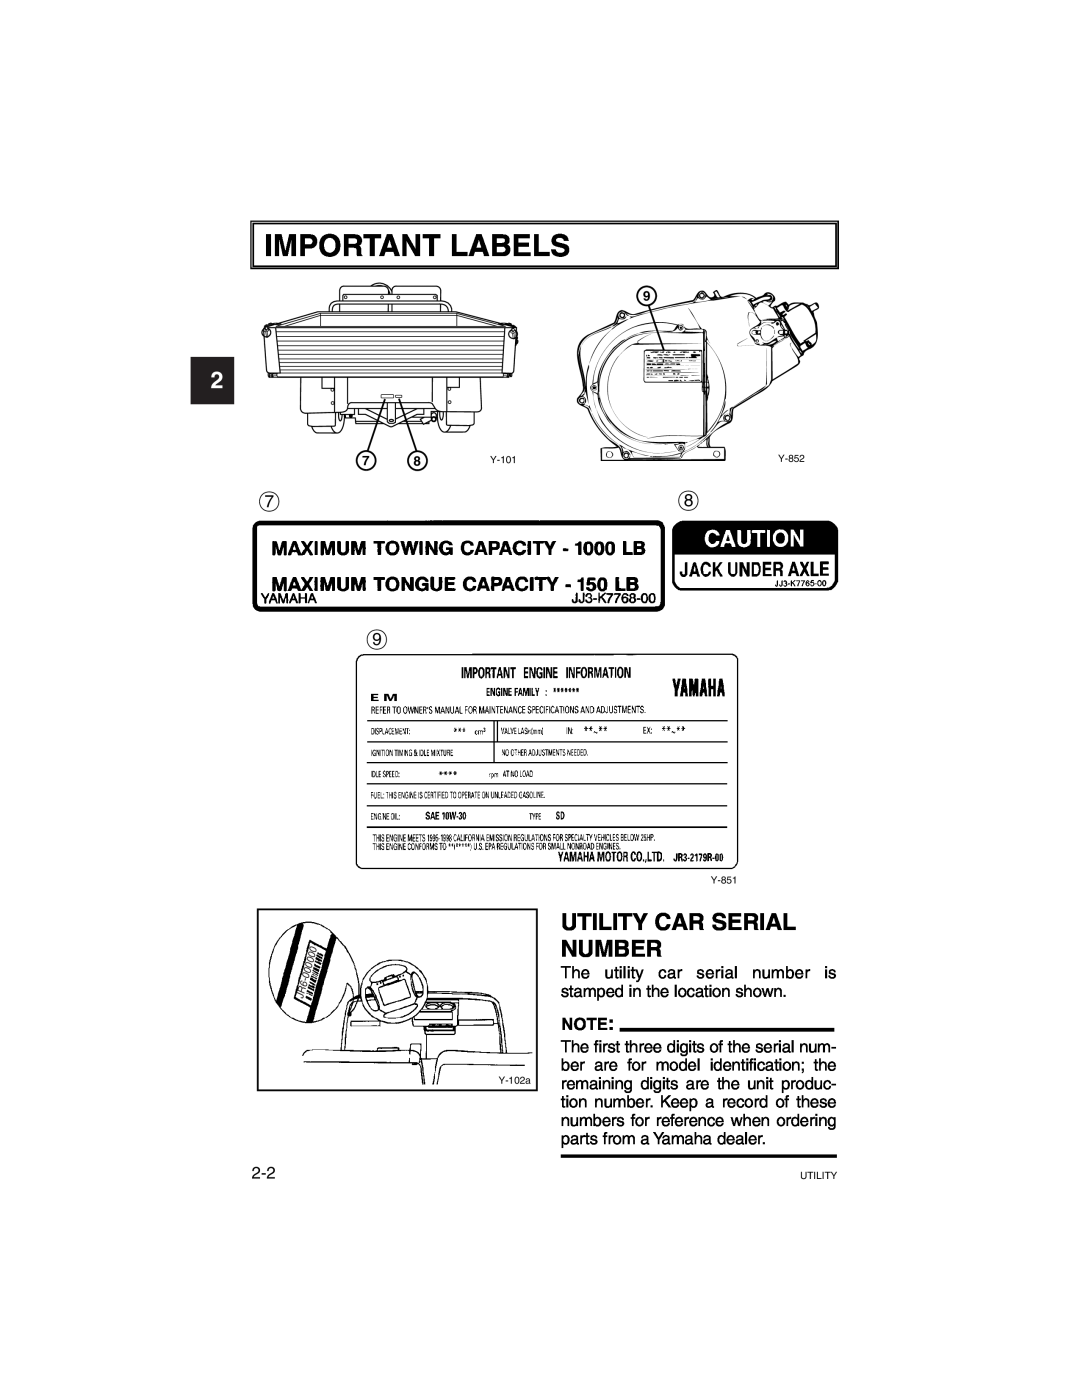 Yamaha G21A manual 1 2 3 4 5, Important Labels, Utility Car Serial Number 